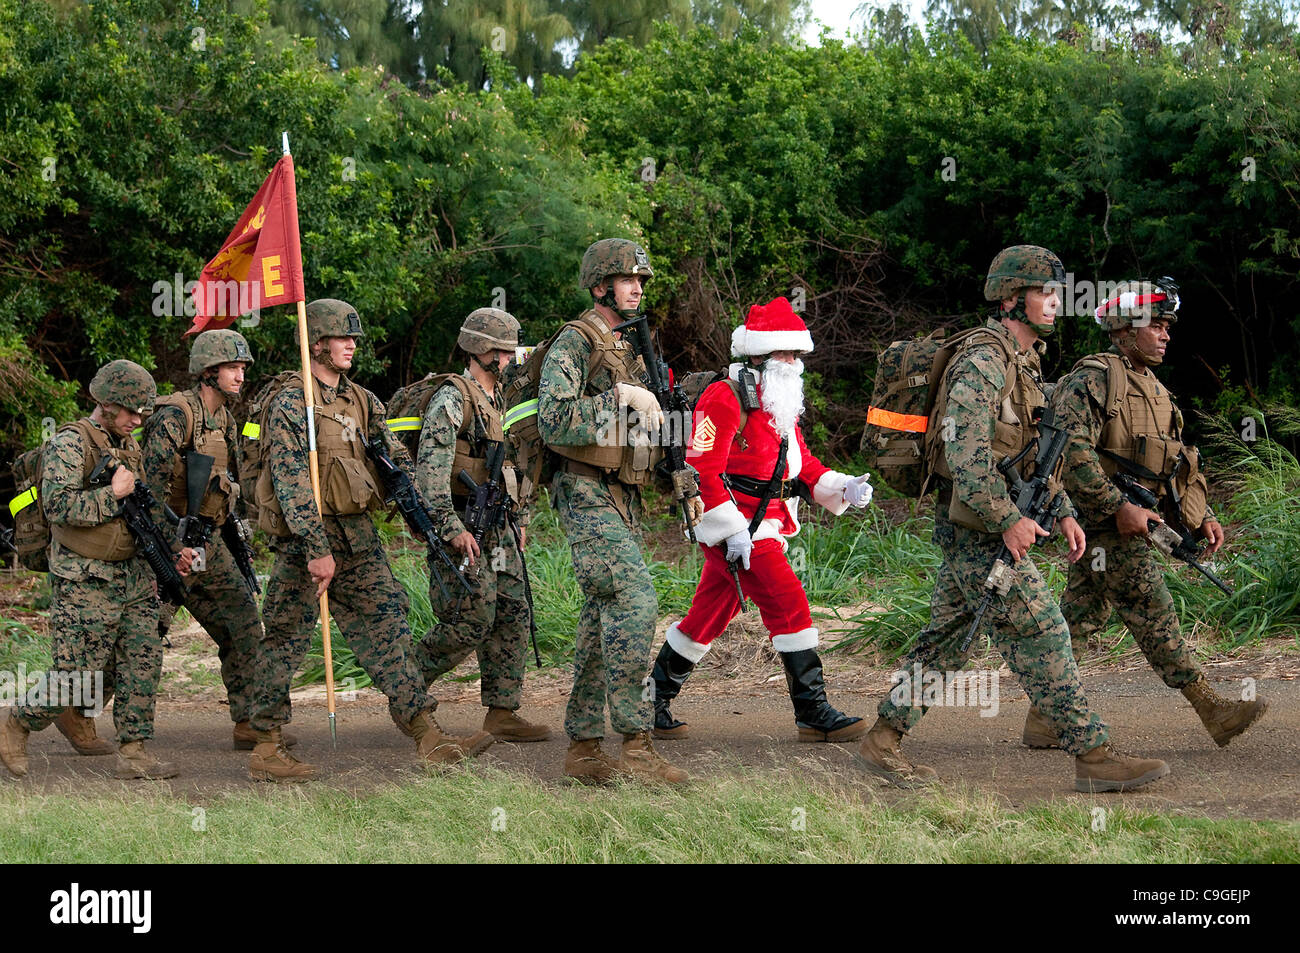 Santa Claus marches along with Marines from 2nd Battalion, 3rd Marine Regiment at the Boondocker training December 19, 2011 at Kaneohe Bay, Hawaii. The Marines were participating in the Island Warrior Combat Competition III and Toys for Tots drive at the Marine Corps Base Hawaii. Stock Photo